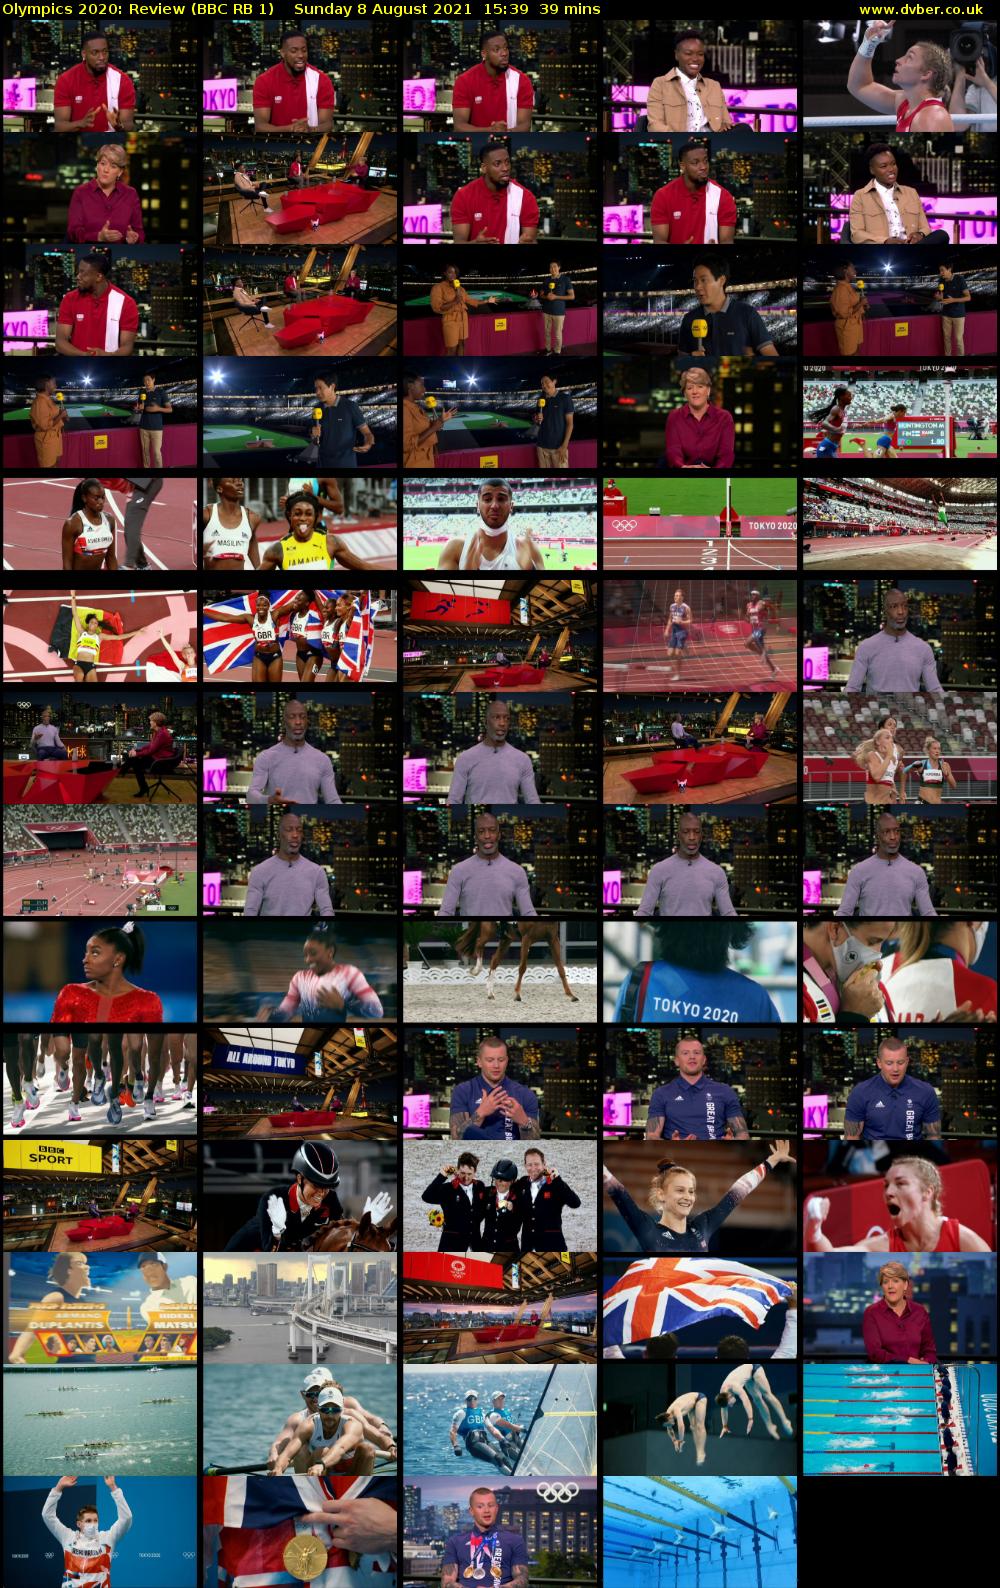 Olympics 2020: Review (BBC RB 1) Sunday 8 August 2021 15:39 - 16:18